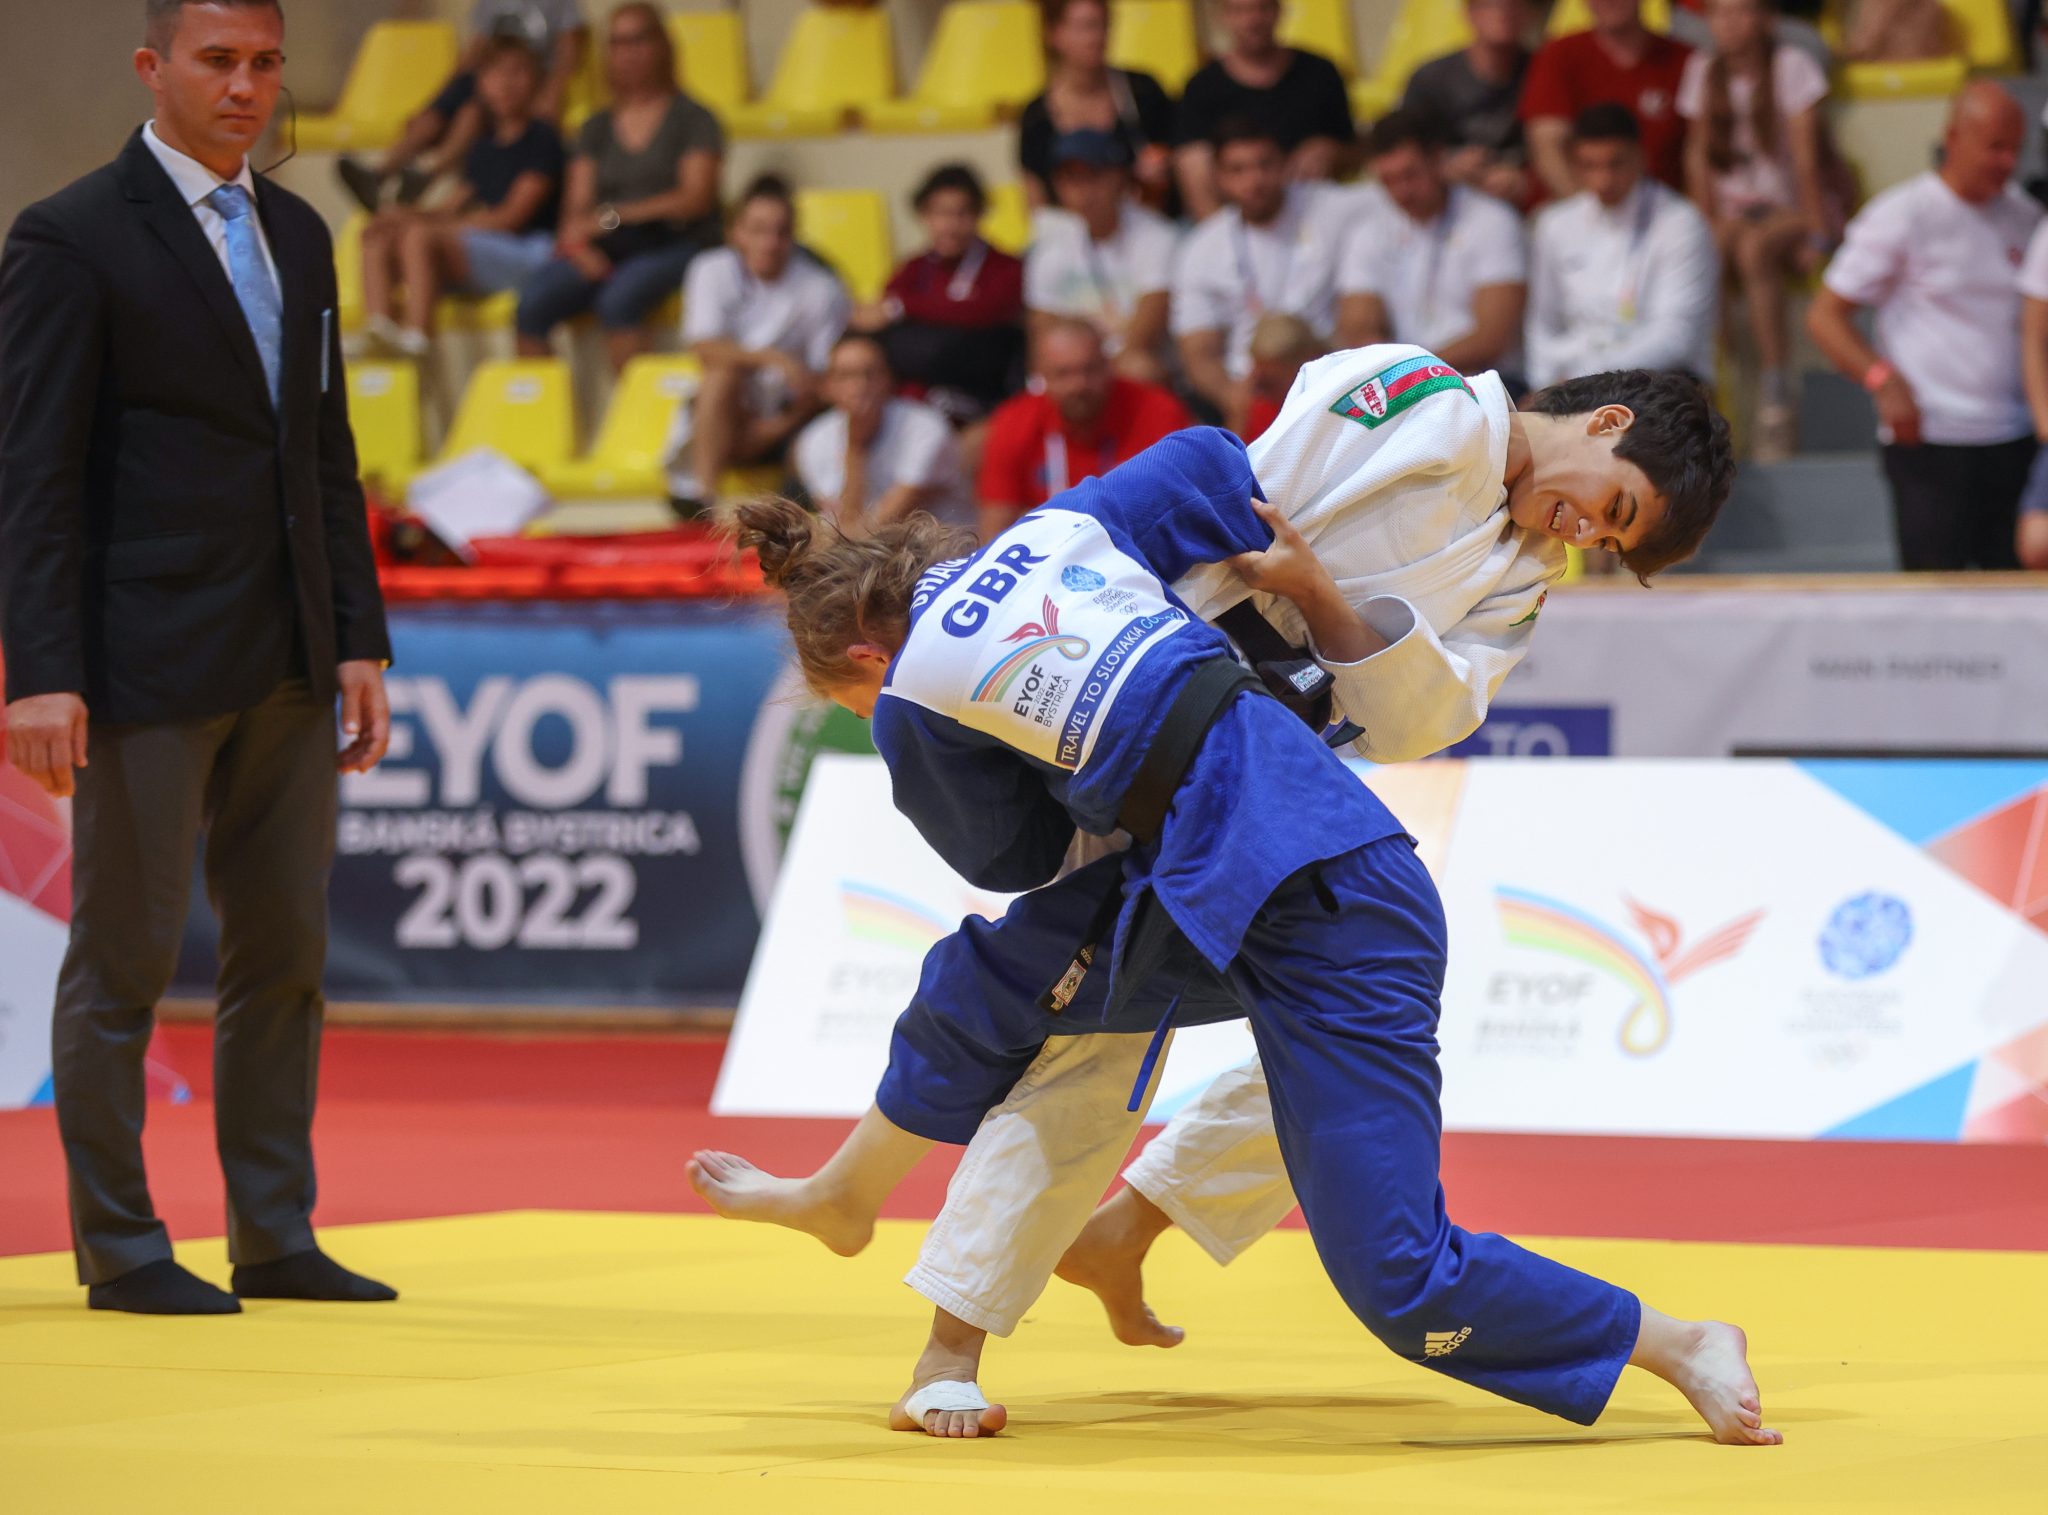 AZERBAIJAN AND NETHERLANDS LEAD THE CHARGE IN EYOF DAY ONE PRELIMINARIES